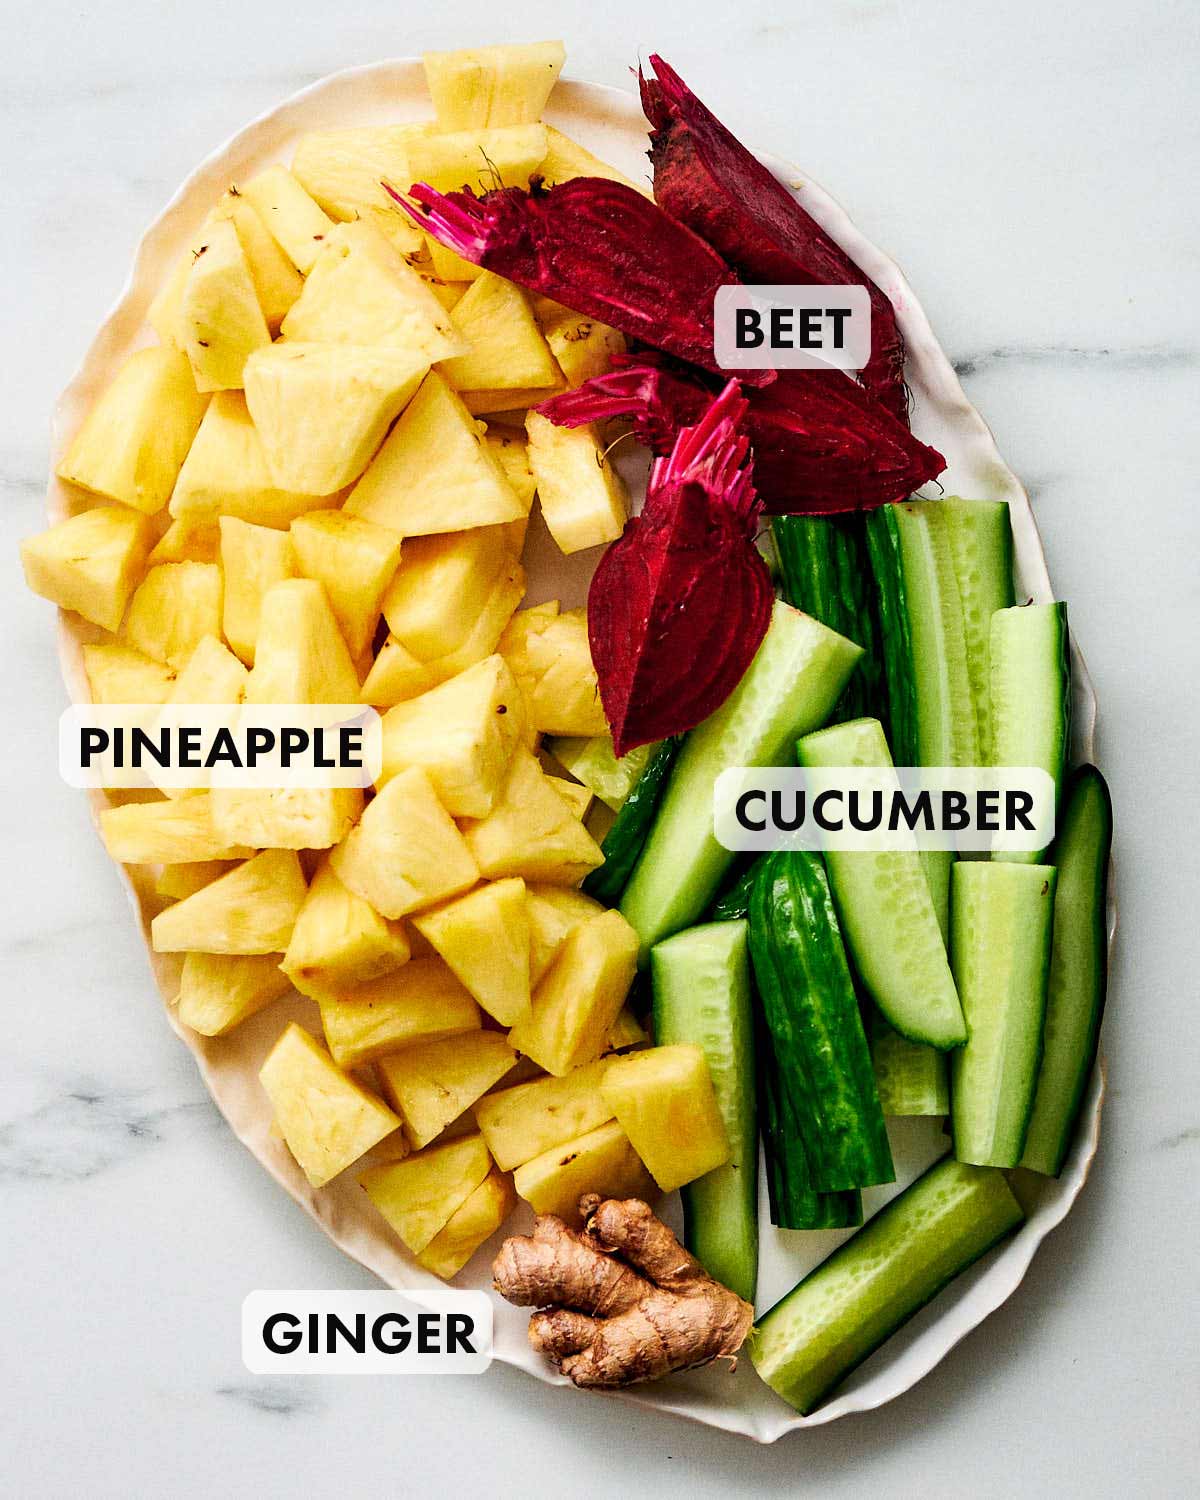 Pineapple, Beet, Cucumber, and Ginger chopped up on a plate.